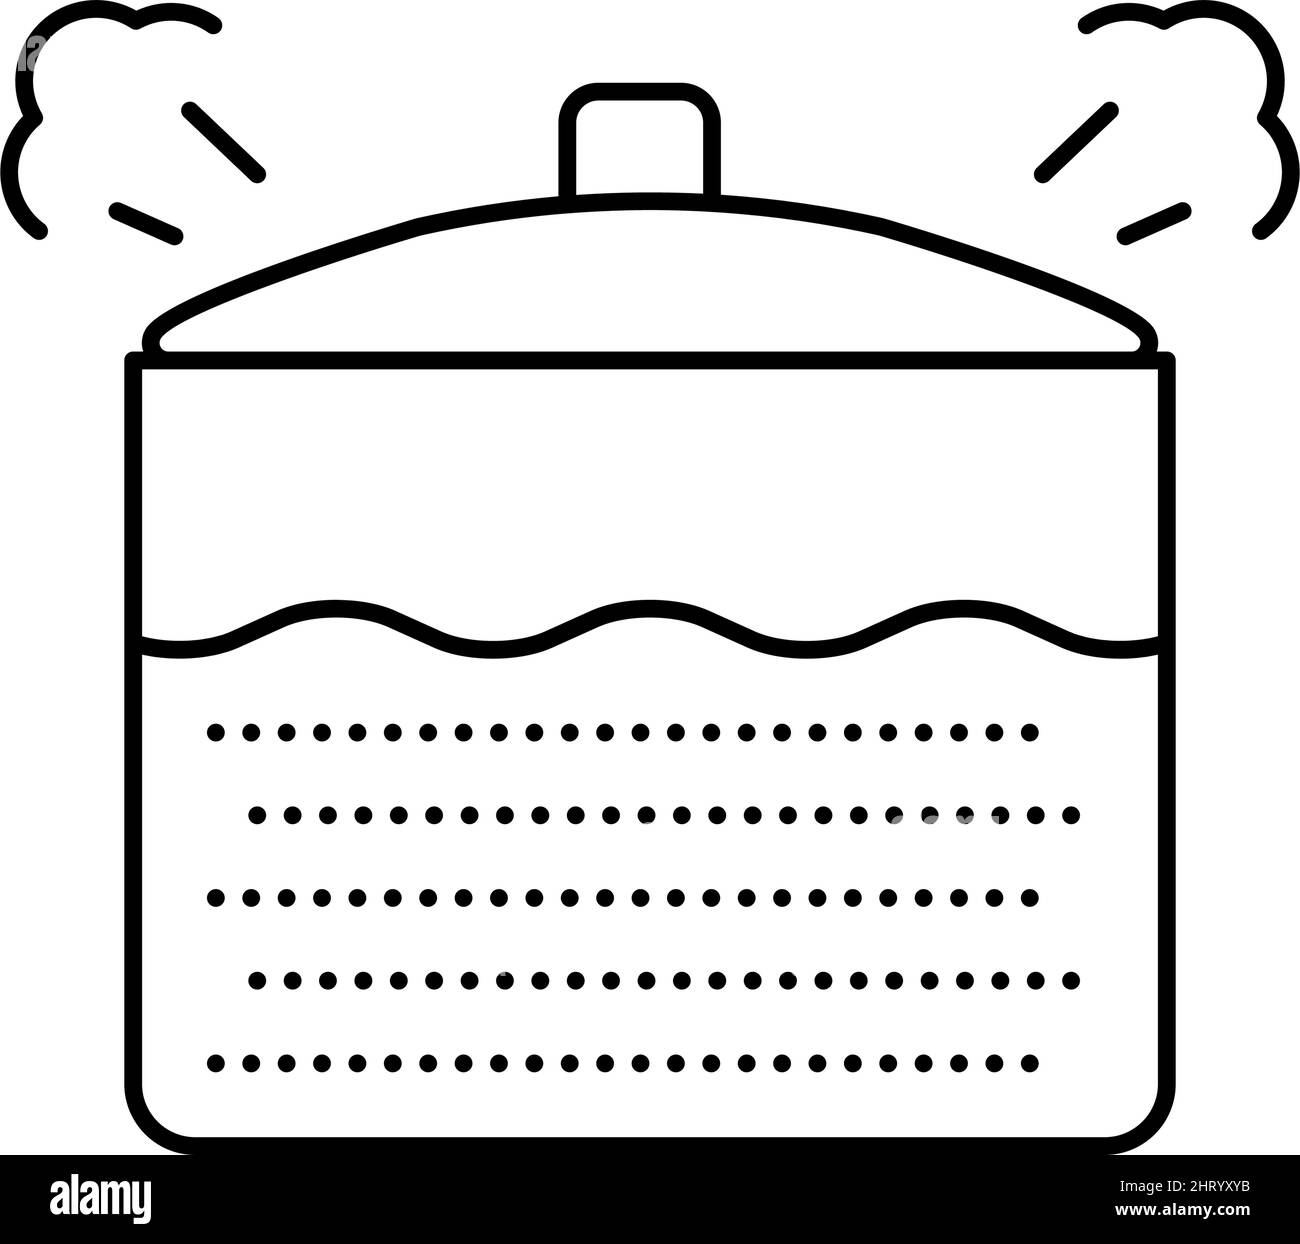 boiling oatmeal line icon vector illustration Stock Vector